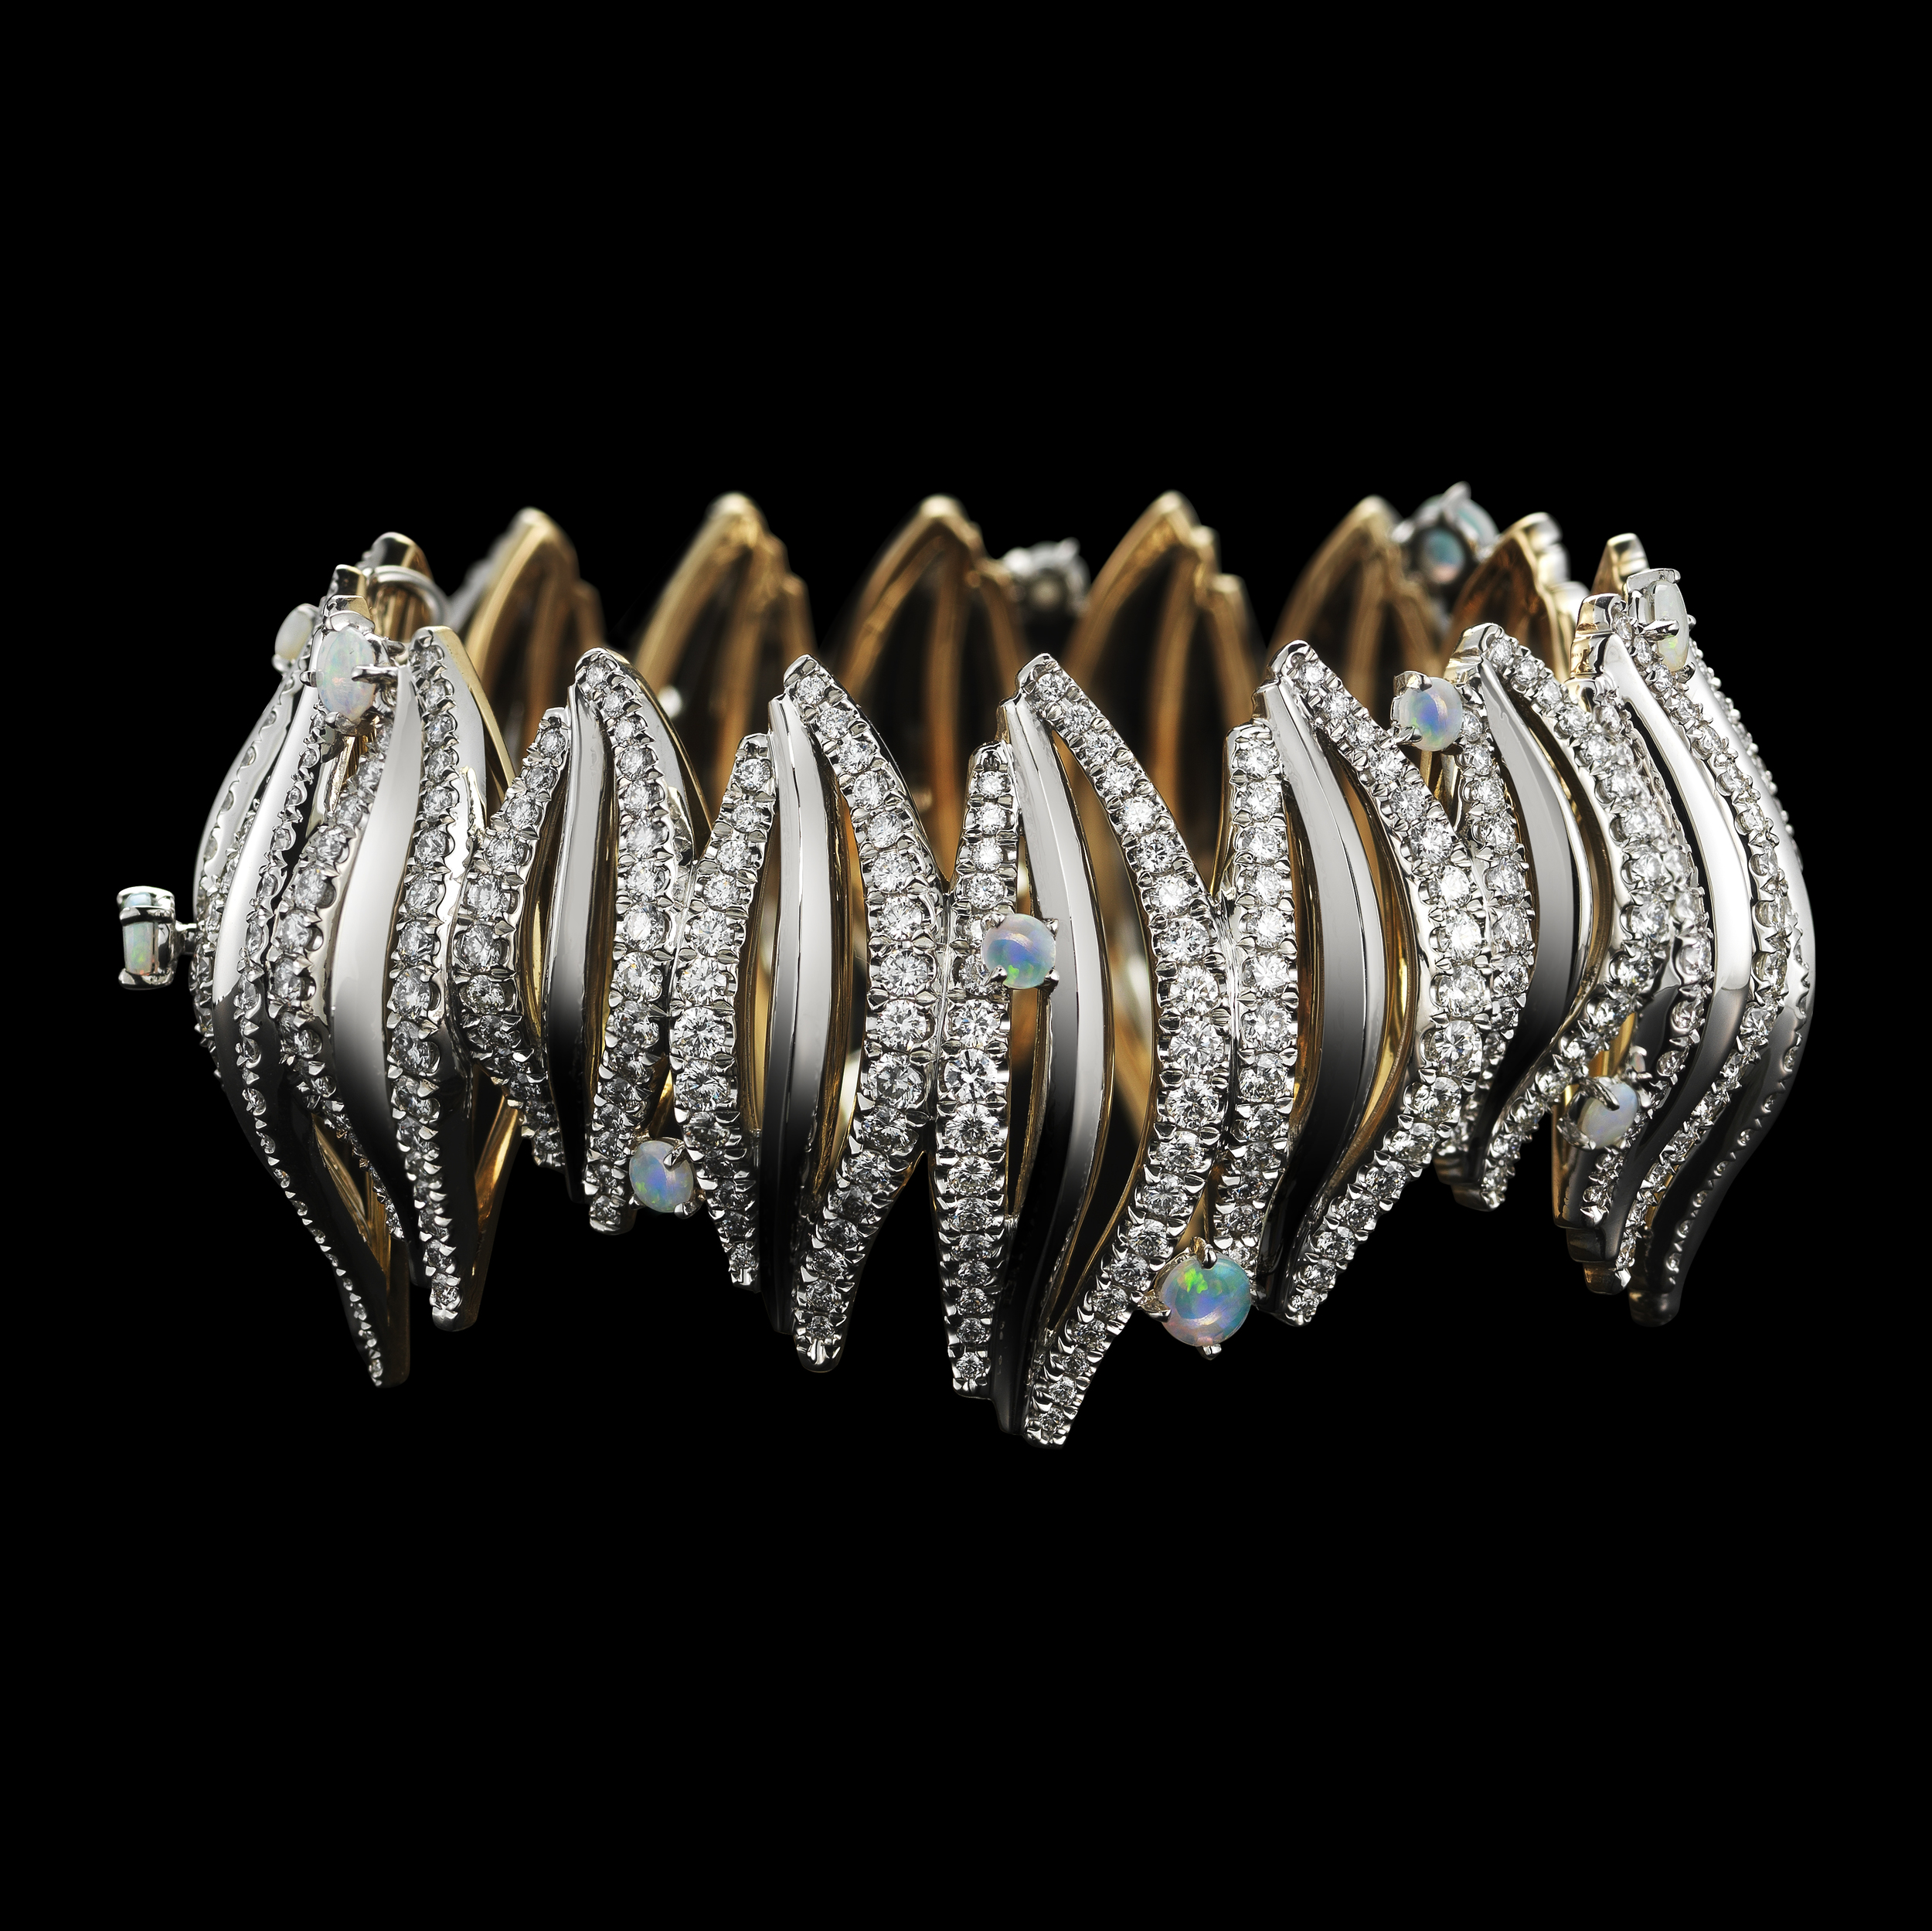  Branch diamond cuff with opal cabochons.&nbsp; 